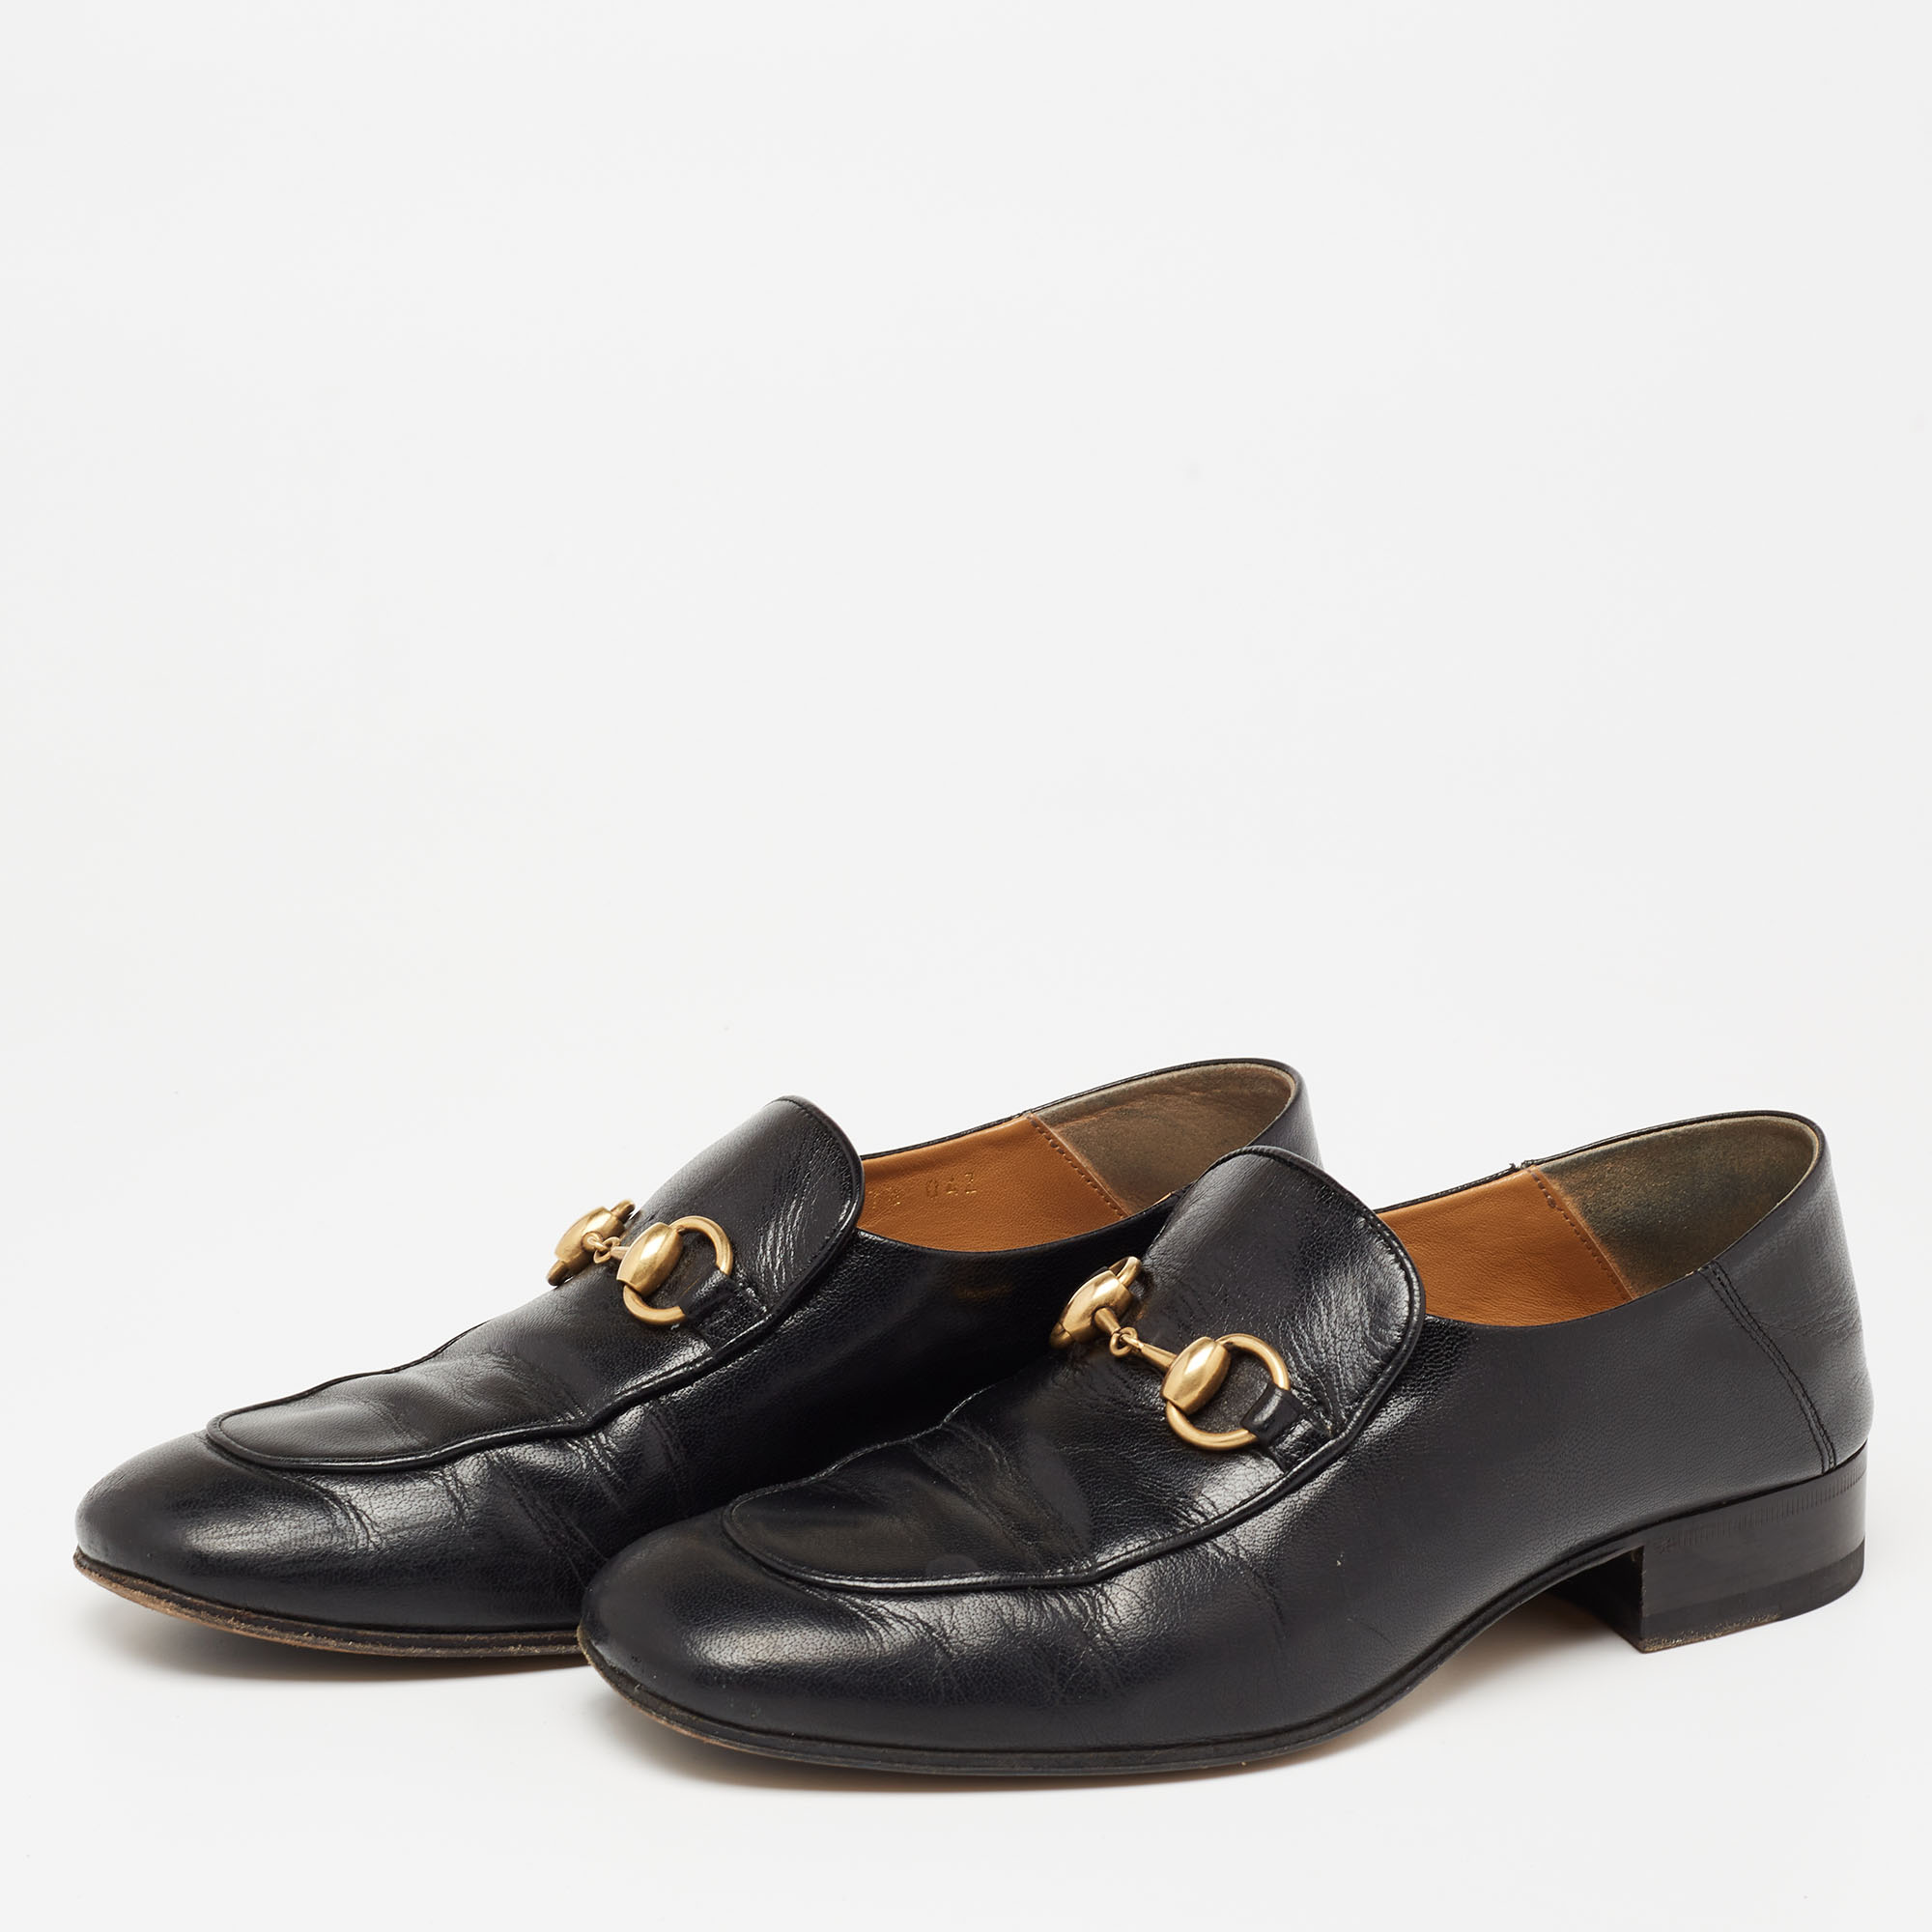 

Gucci Black Leather Horsebit Collapsible Heel Loafers Size